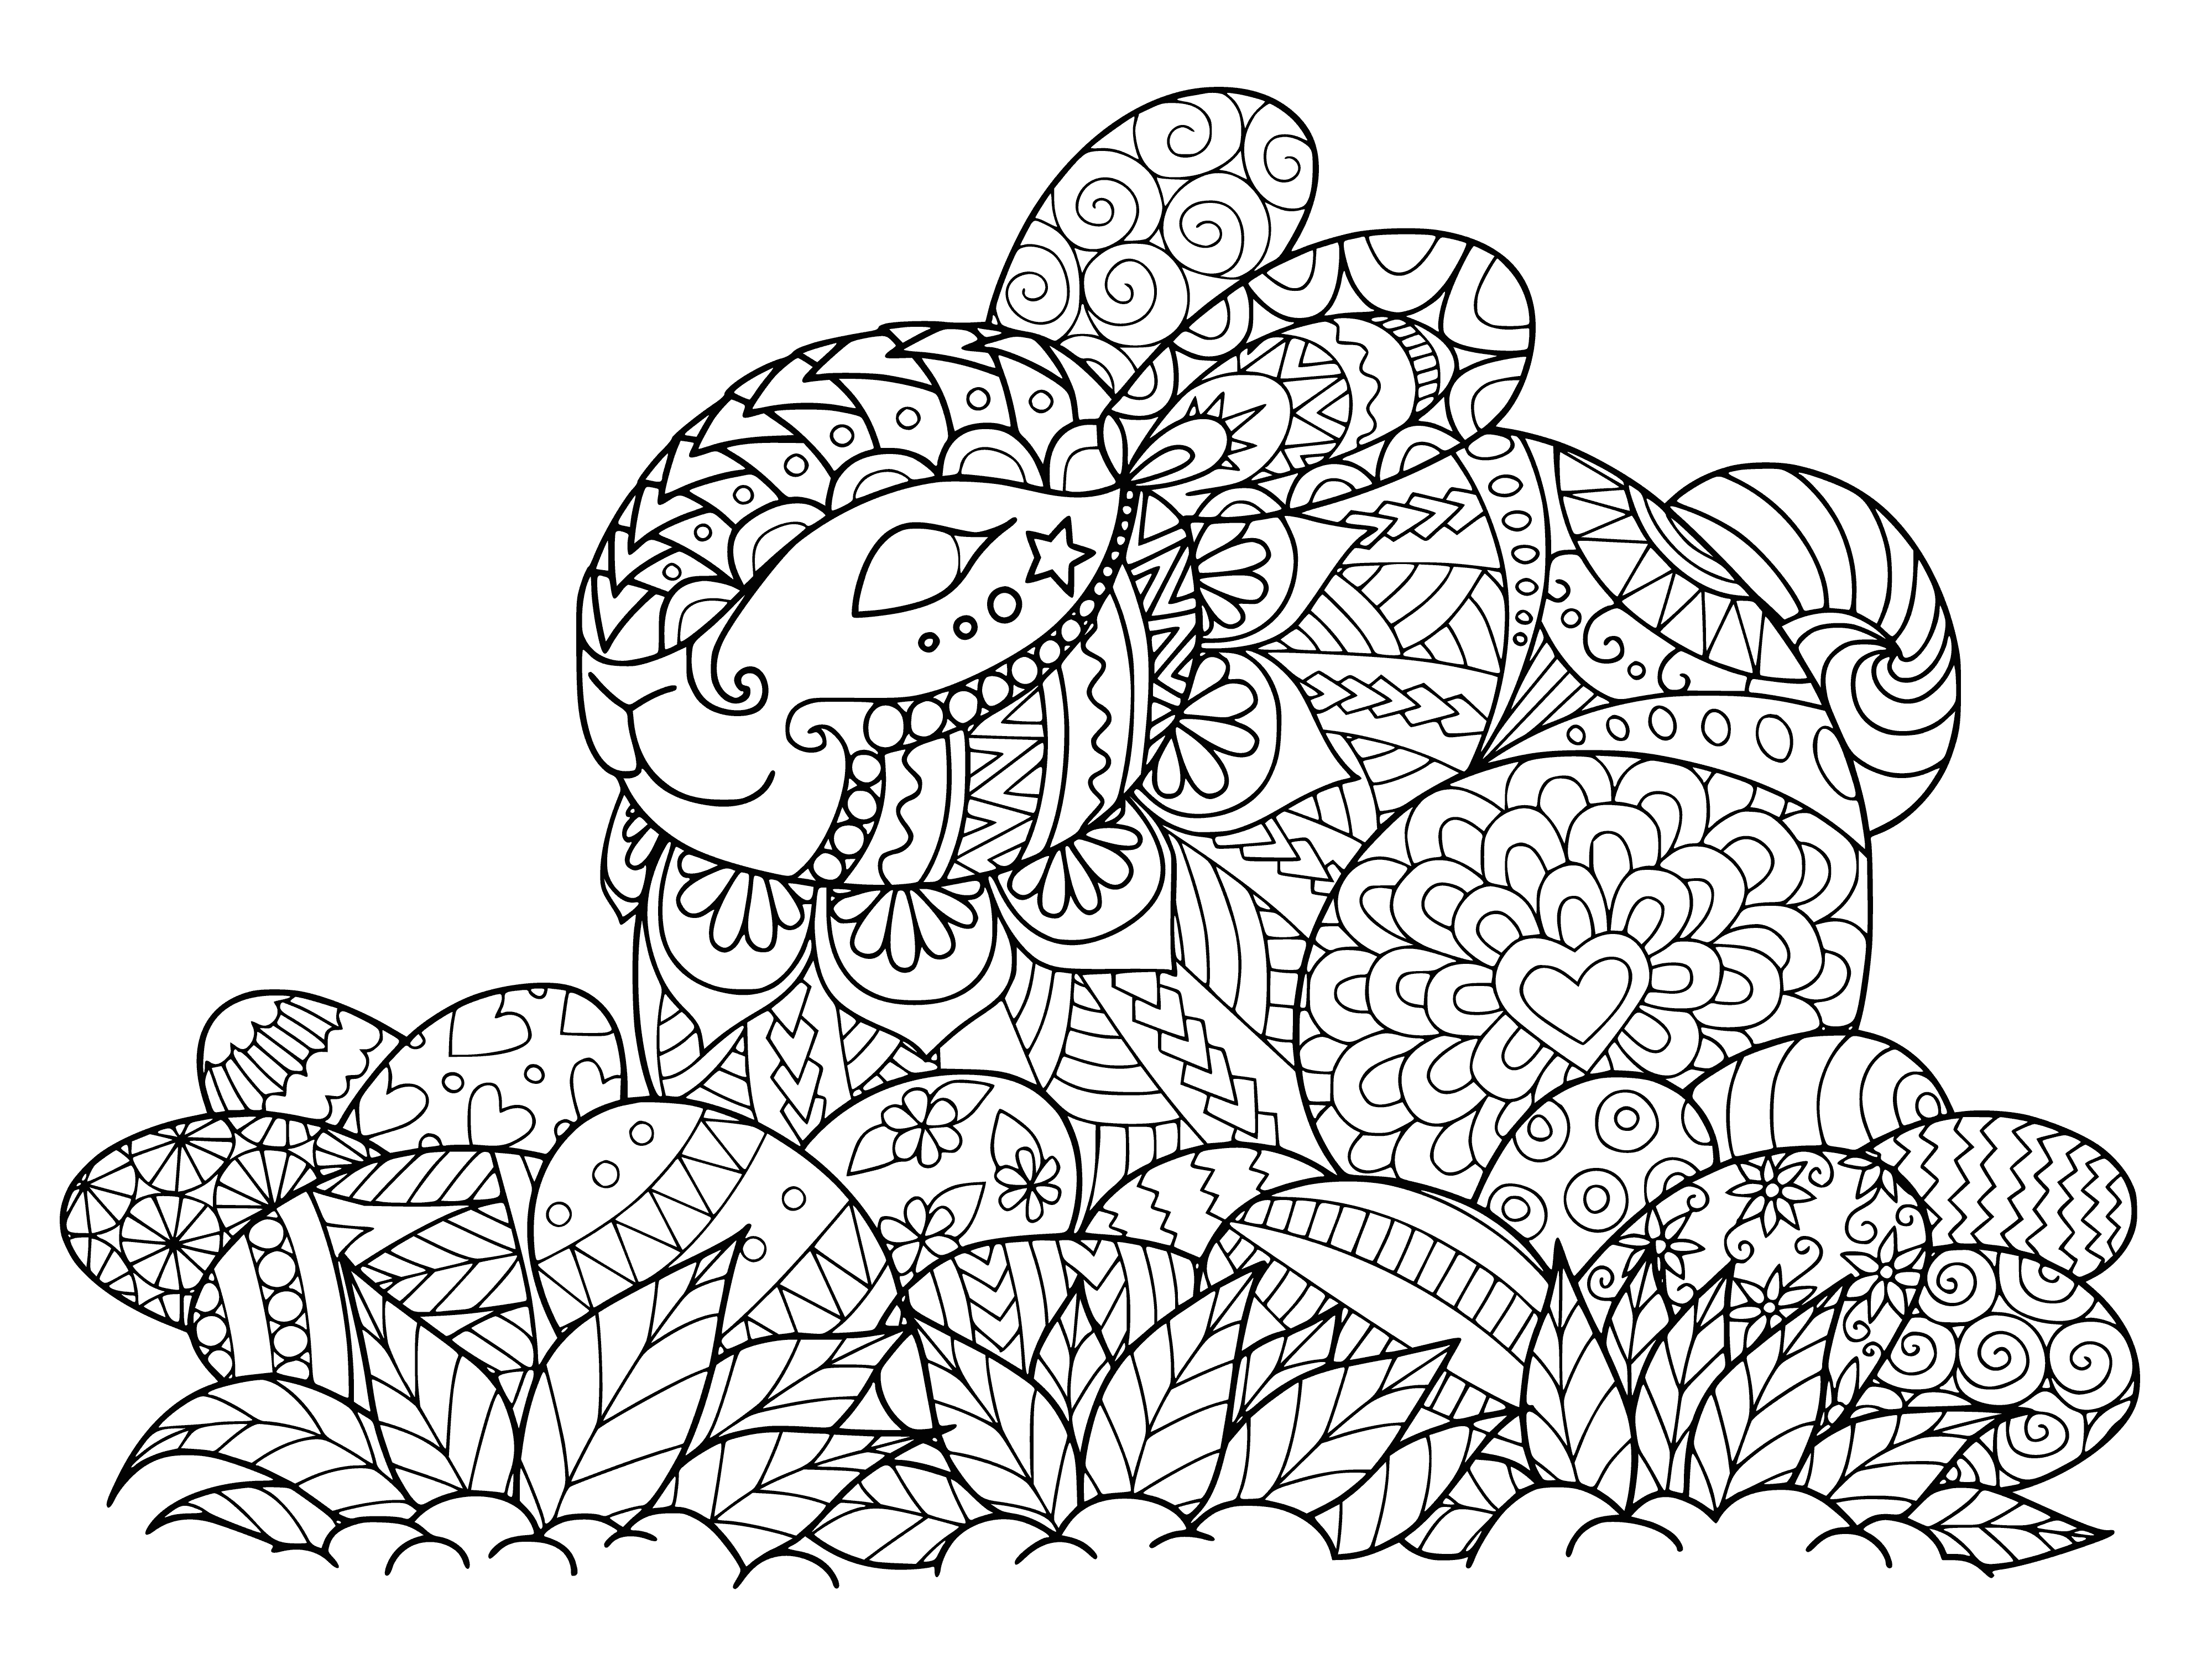 coloring page: Easter bunny holds basket of eggs, sporting a big smile. #HappyEaster!